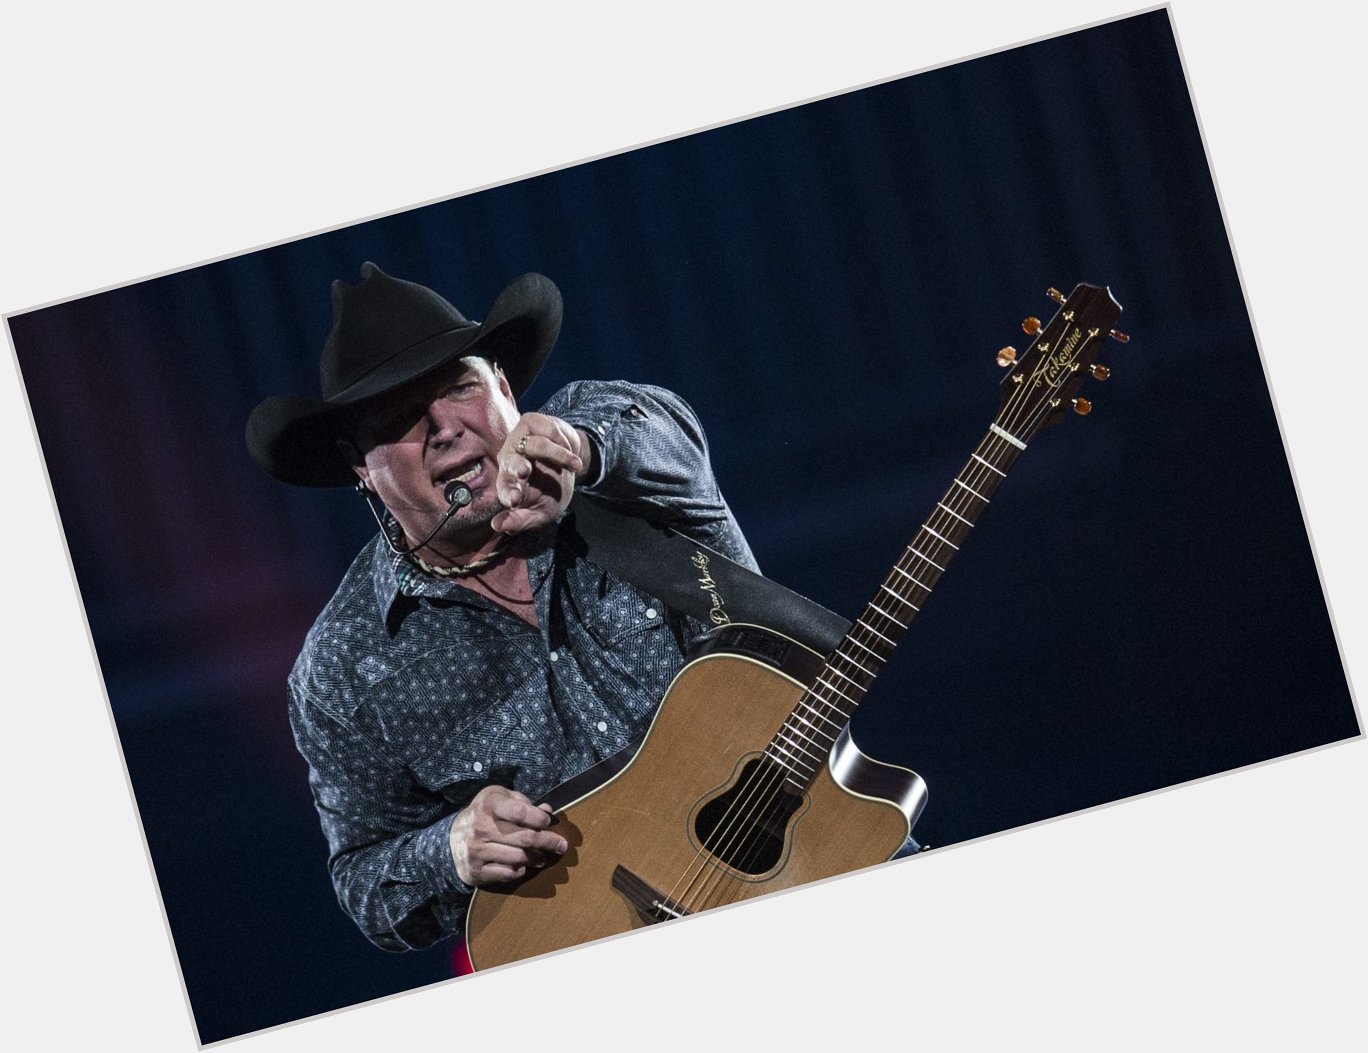 How are YOU wishing Garth Brooks happy birthday today?
Let us know your favorite Garth song below! 